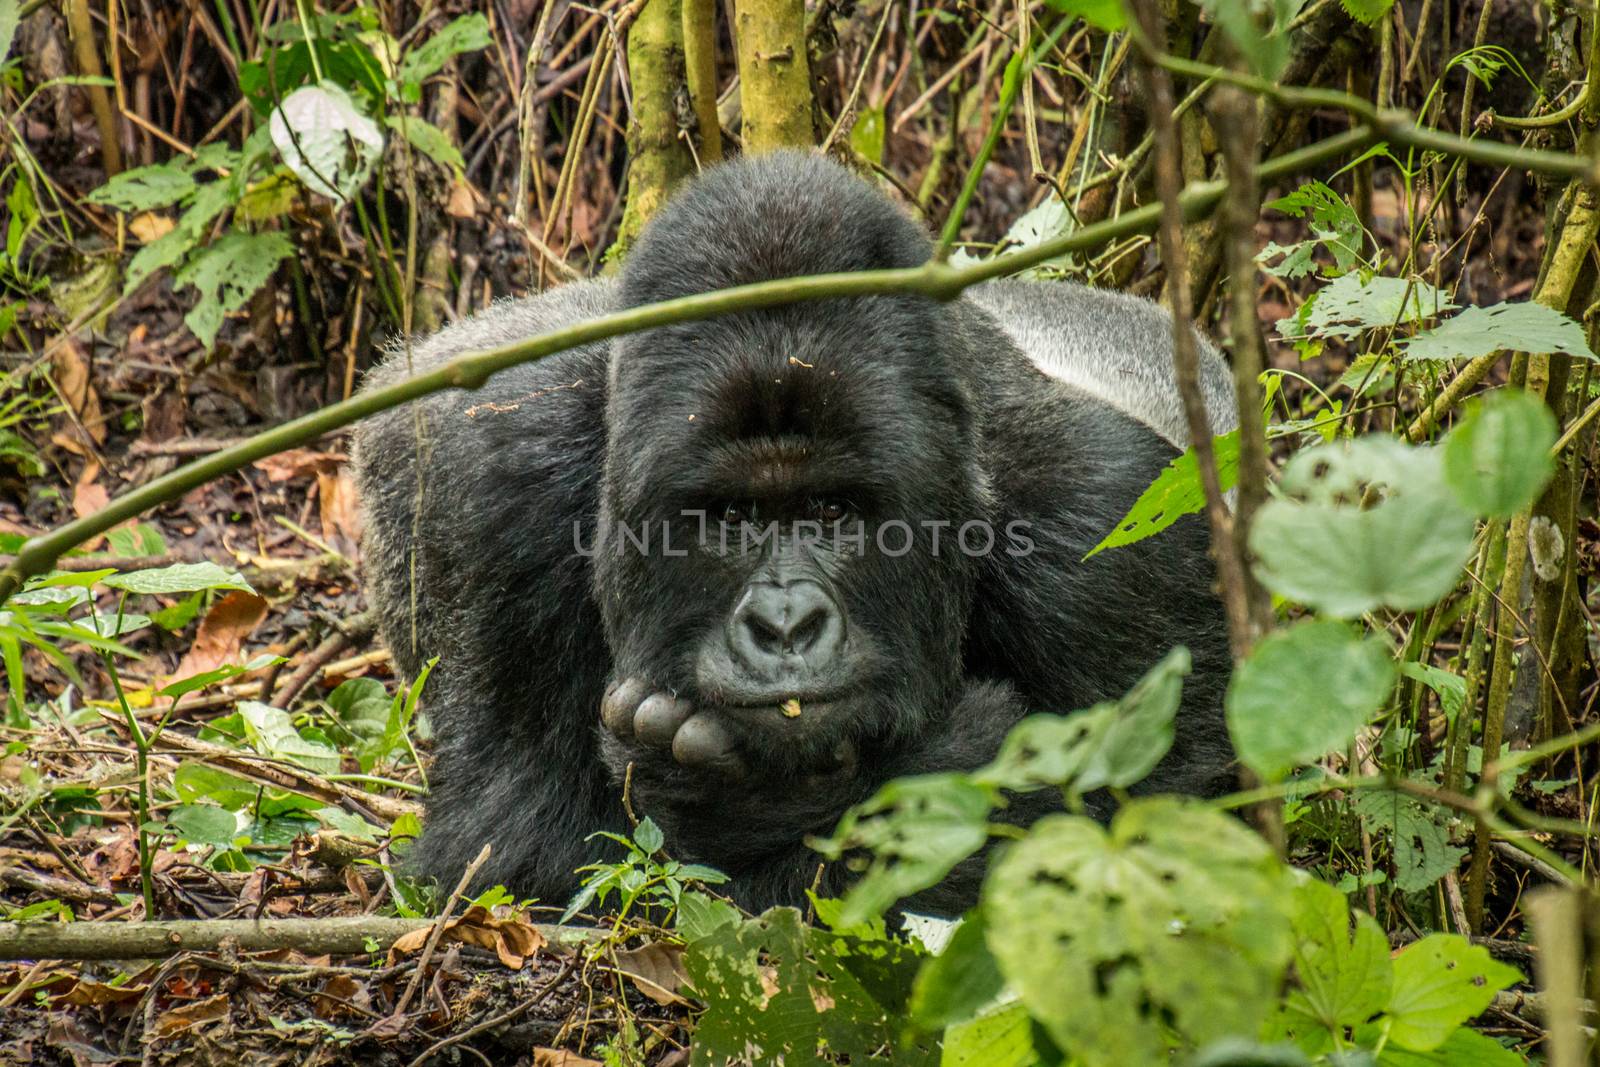 Silverback Mountain gorilla laying in the leaves in the Virunga National Park, Democratic Republic Of Congo.